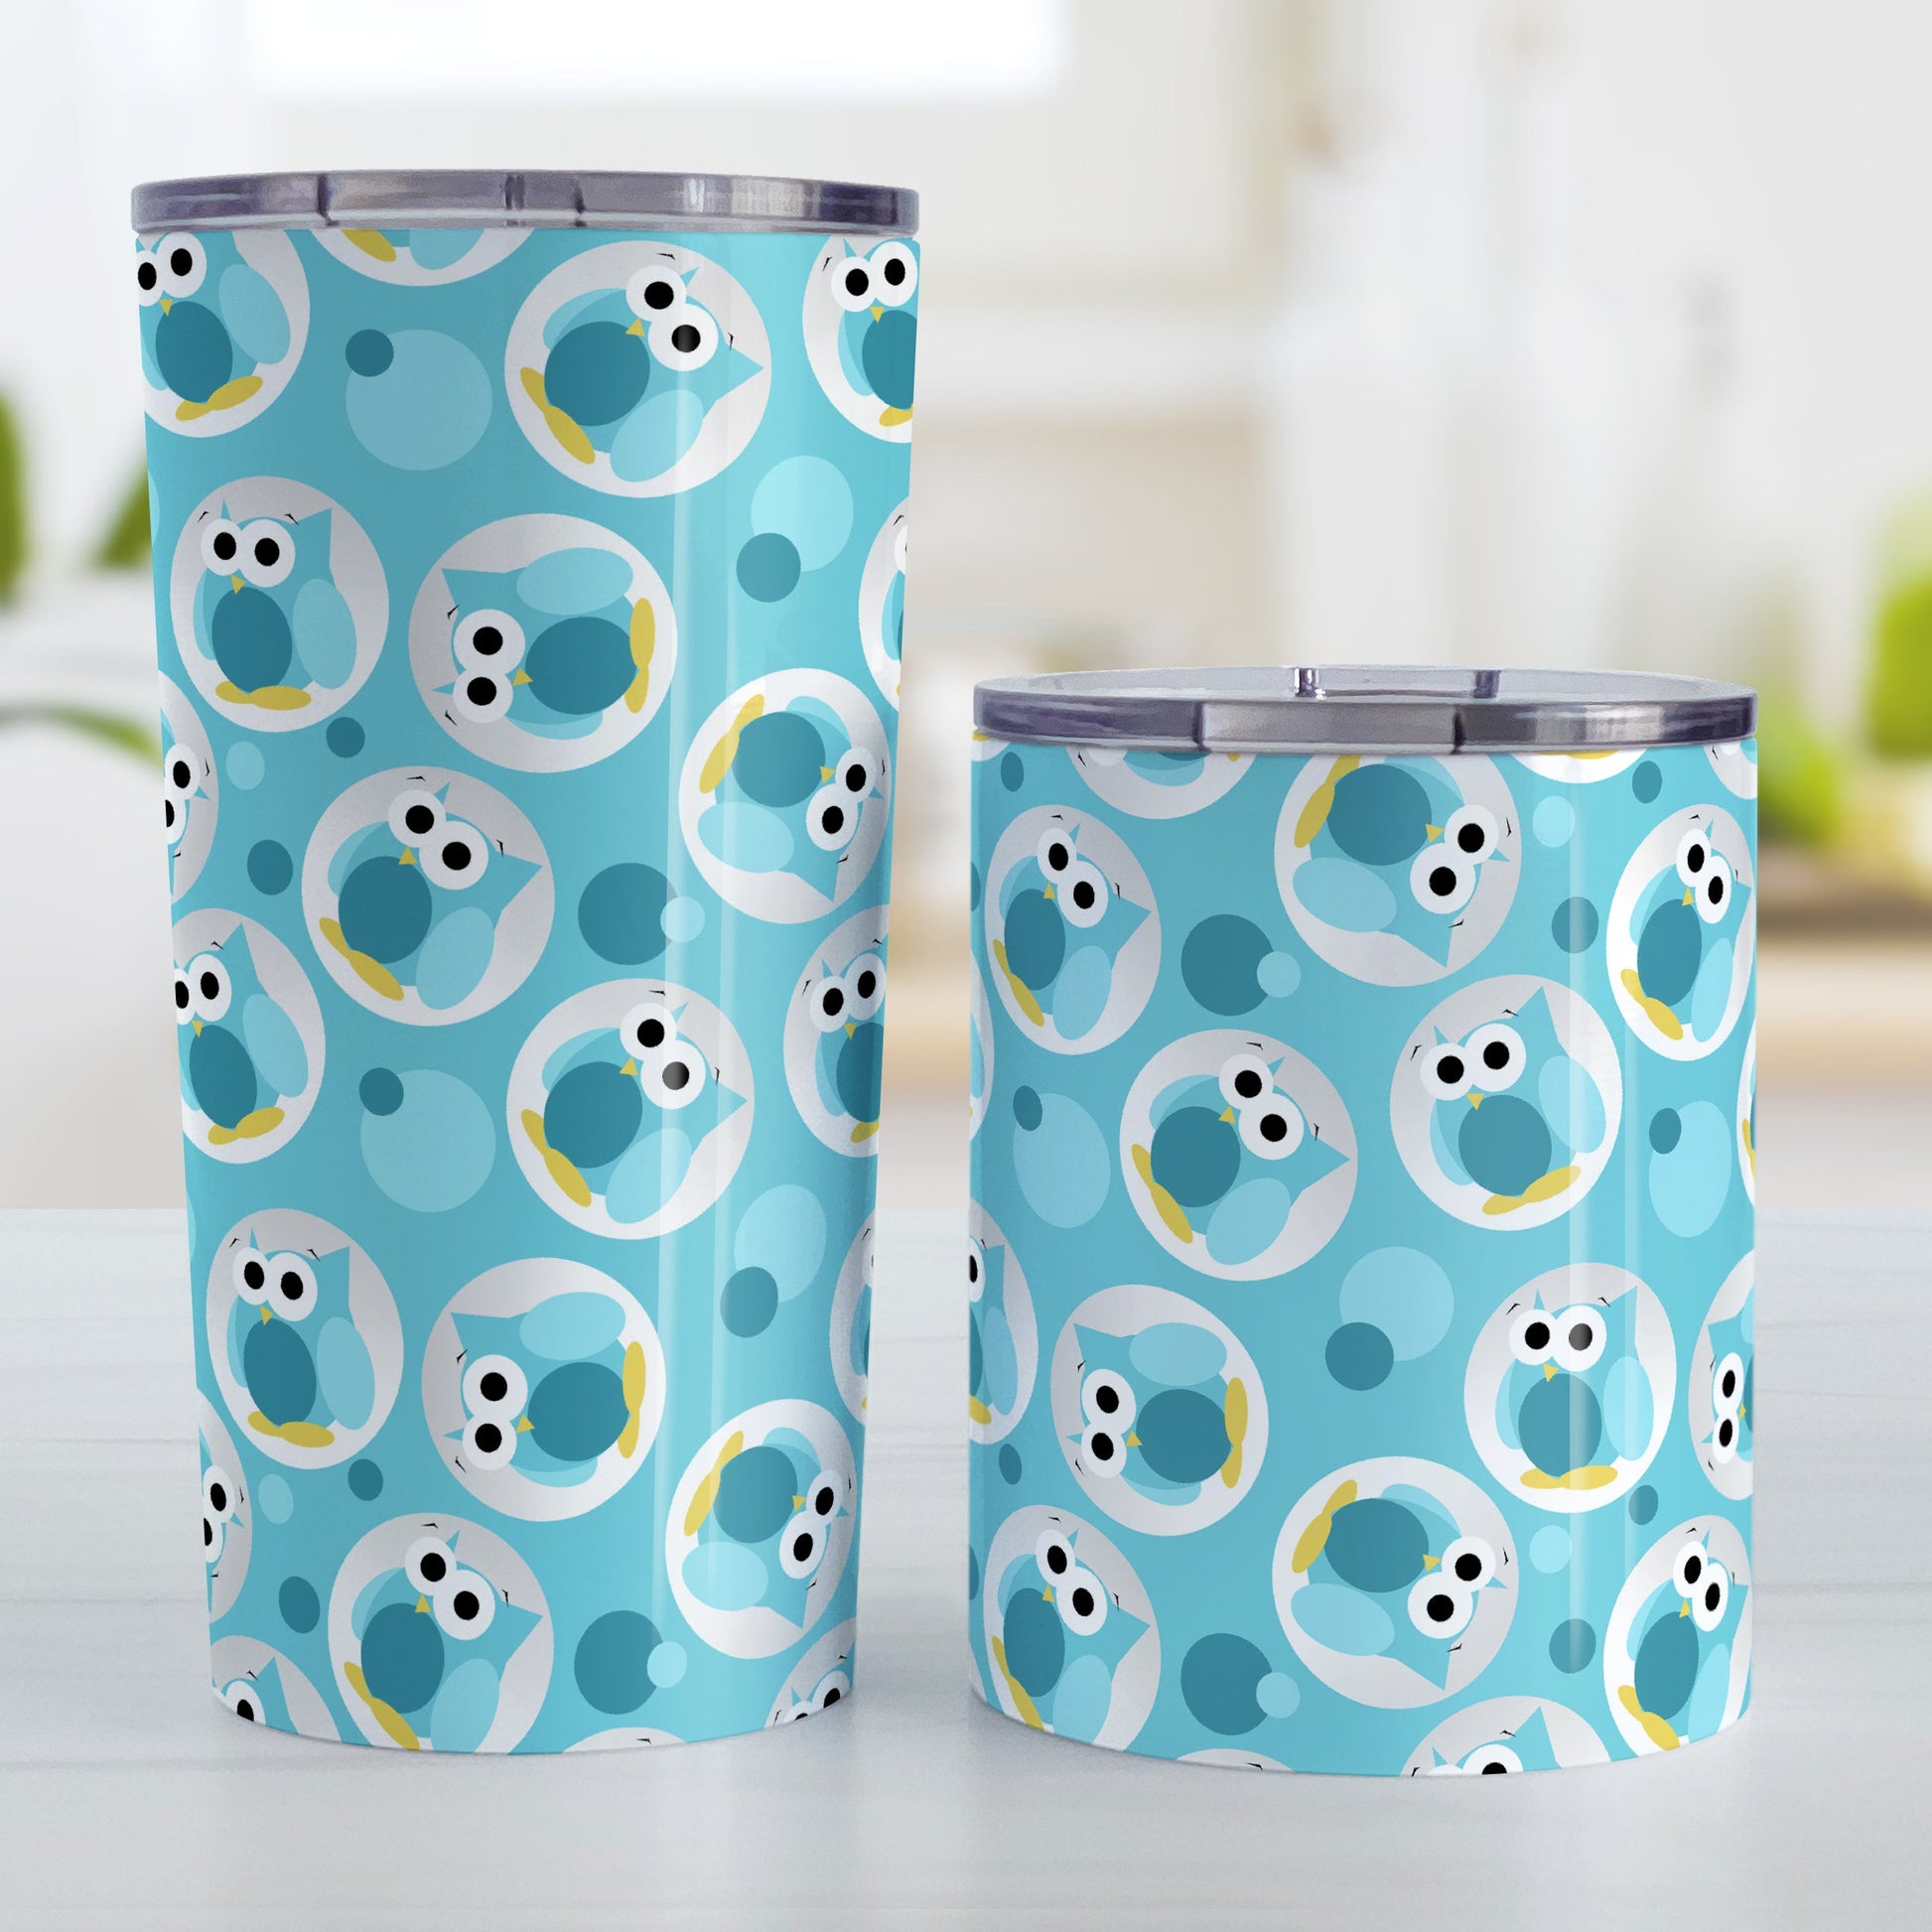 Funny Cute Turquoise Owl Pattern Tumbler Cup (20oz on 10oz, stainless steel insulated) at Amy's Coffee Mugs